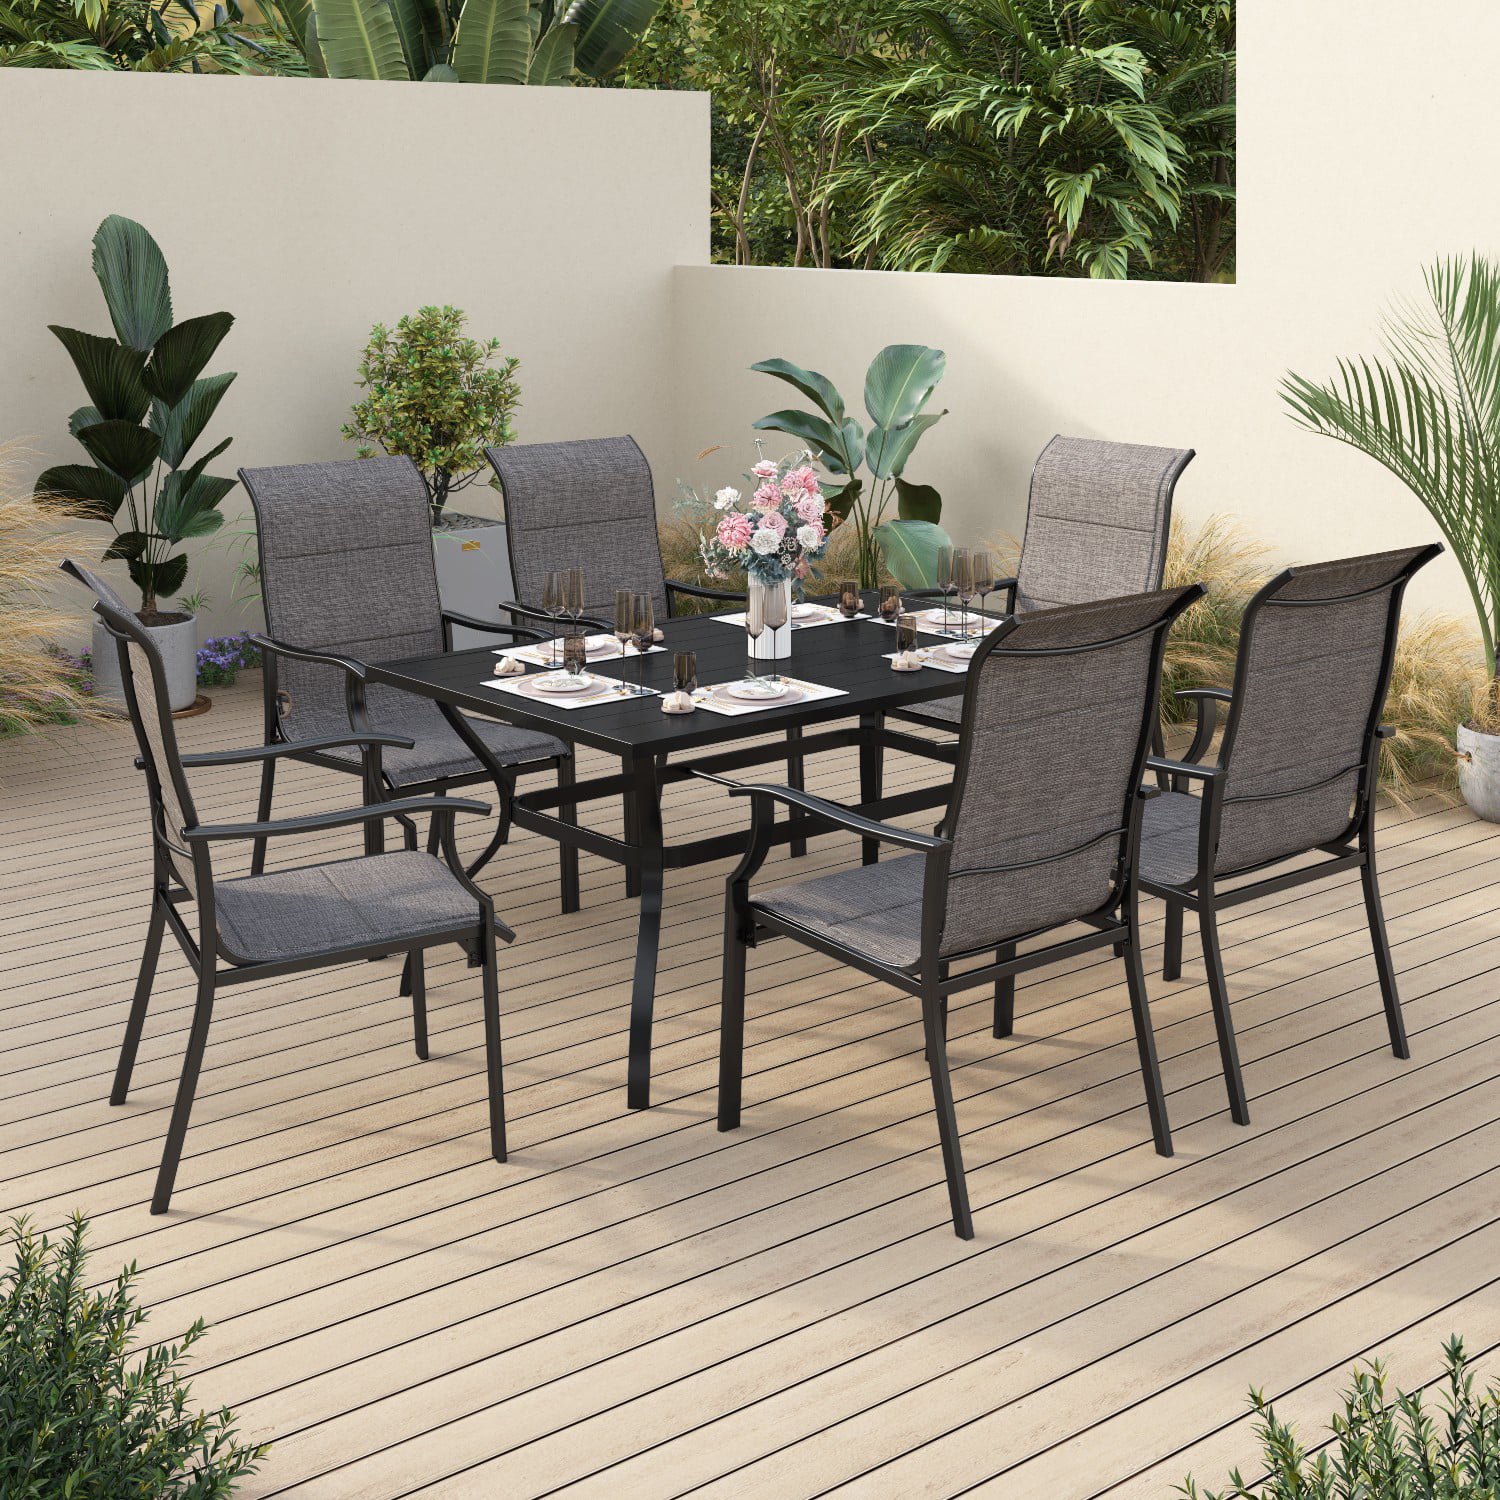 LUVL5-53V 5 pc Courtyard Wicker Dining Set for 4 in Cream Finish 